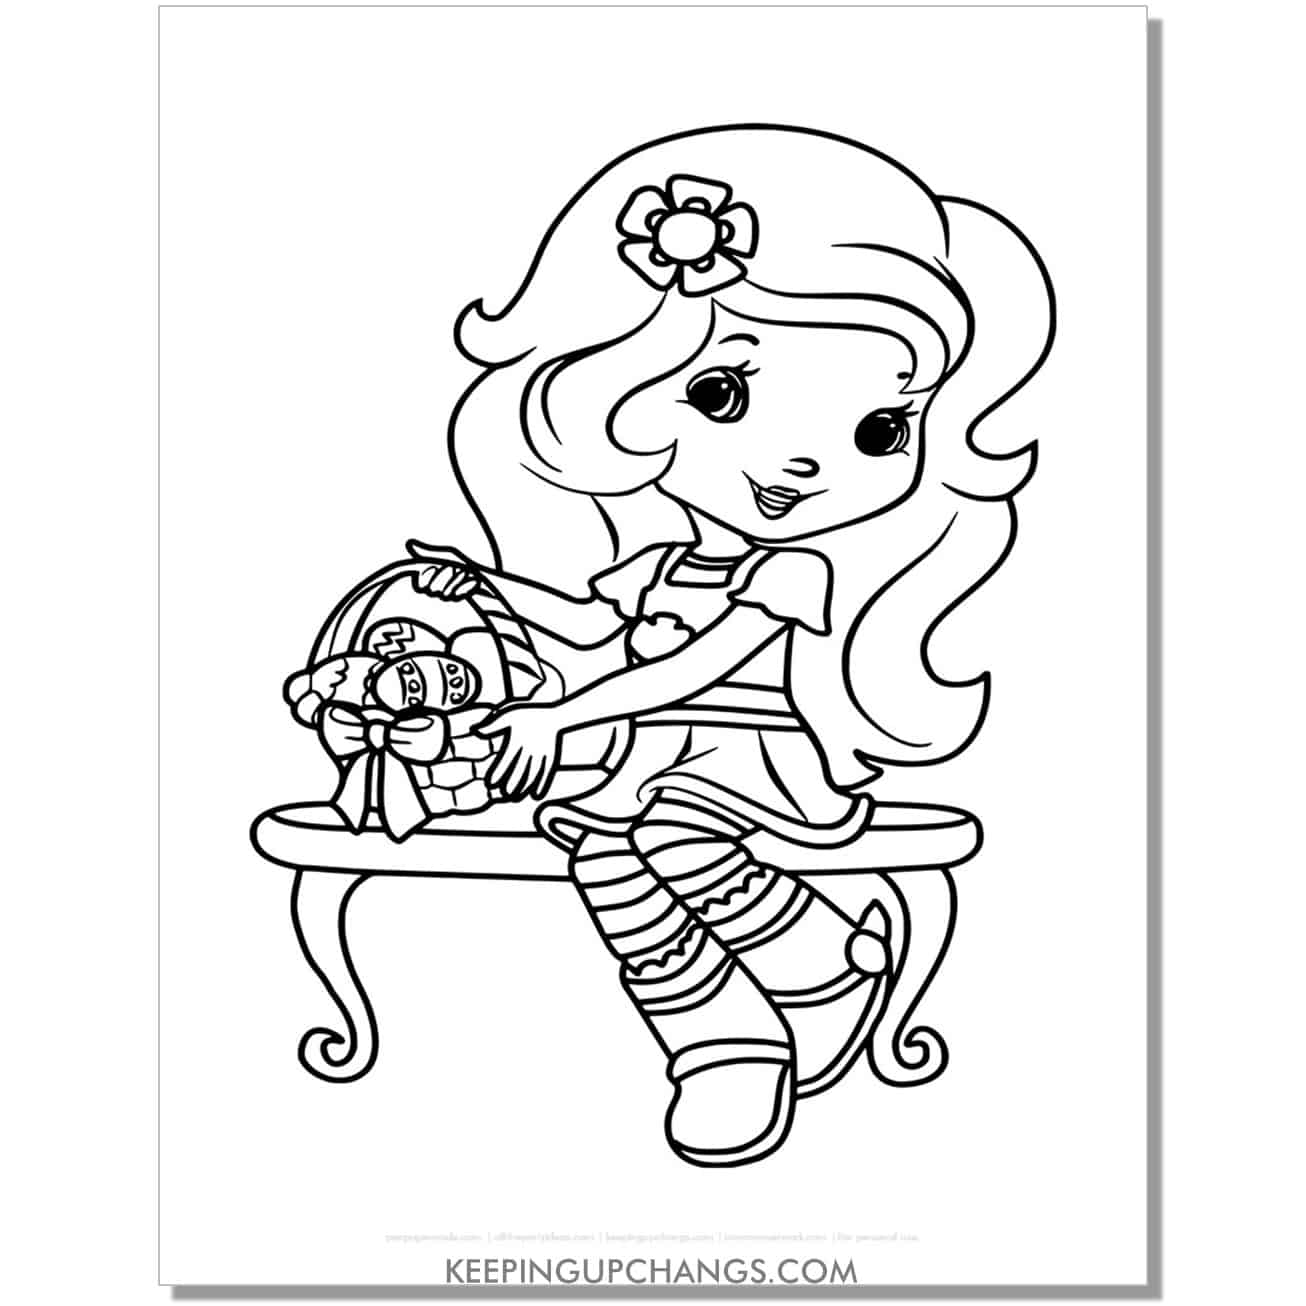 free orange blossom with easter basket strawberry shortcake coloring page, sheet.